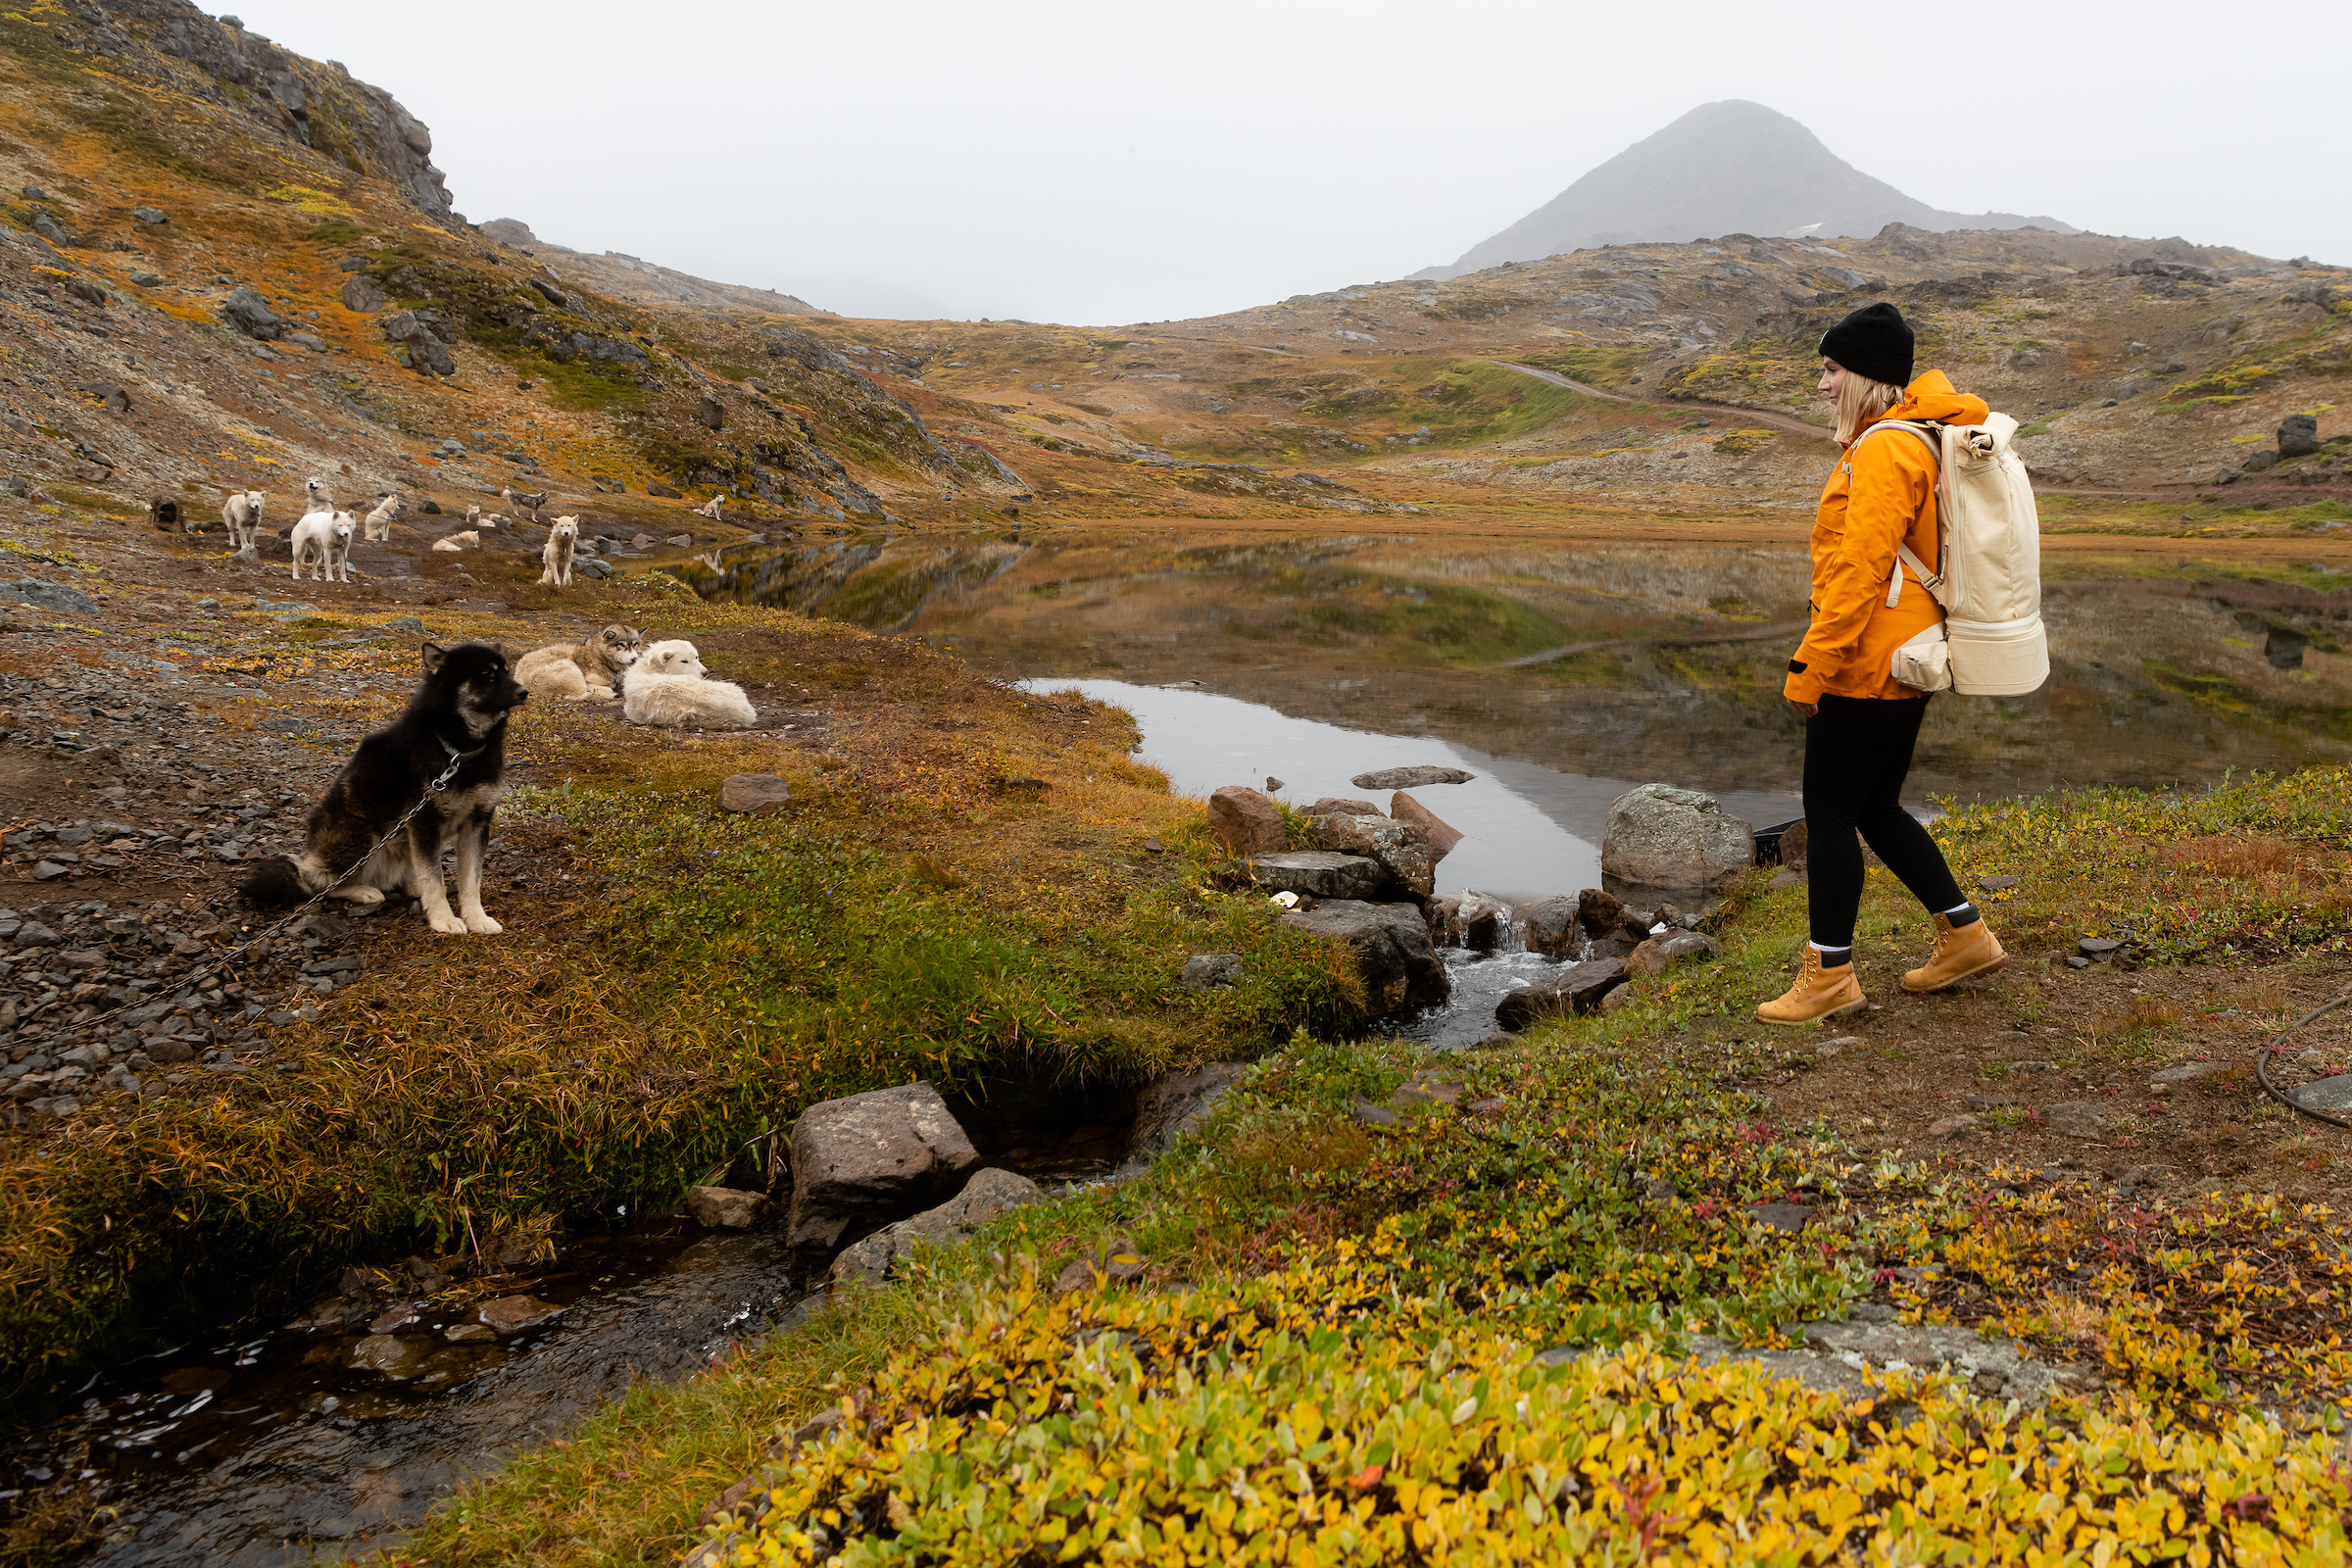 Curious sled dogs in holiday mode. (Flower Valley). Photo by Philipp Mitterlehner - Visit Greenland